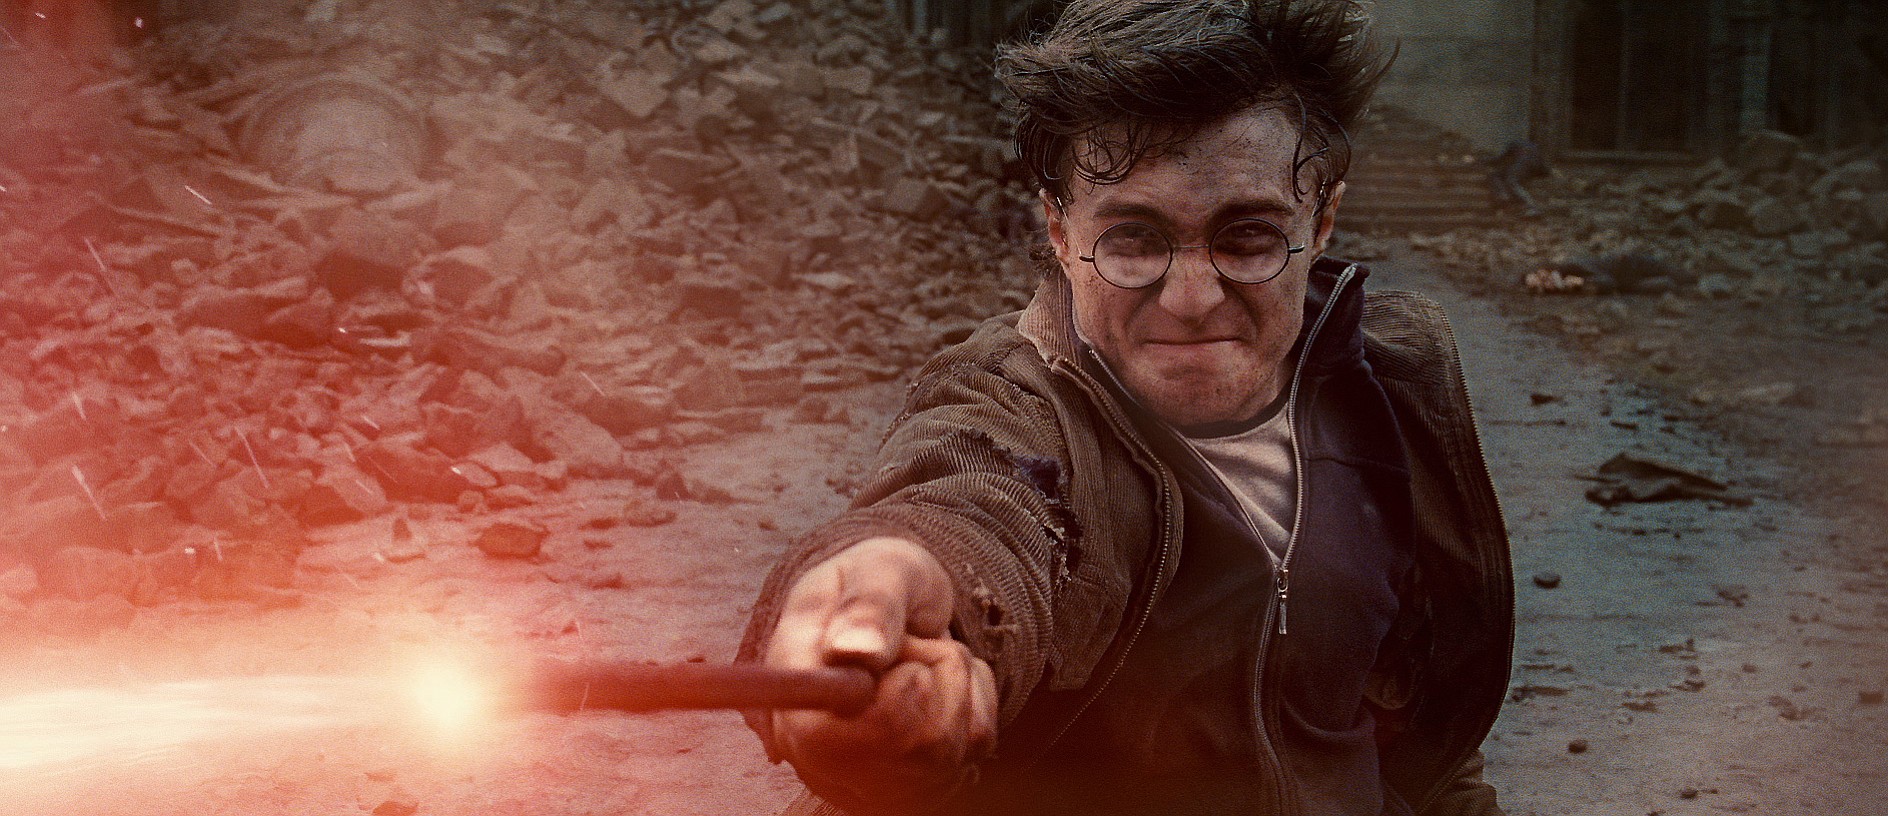 You've gotta wonder, as he turns 35: How's that wand wrist holding up?